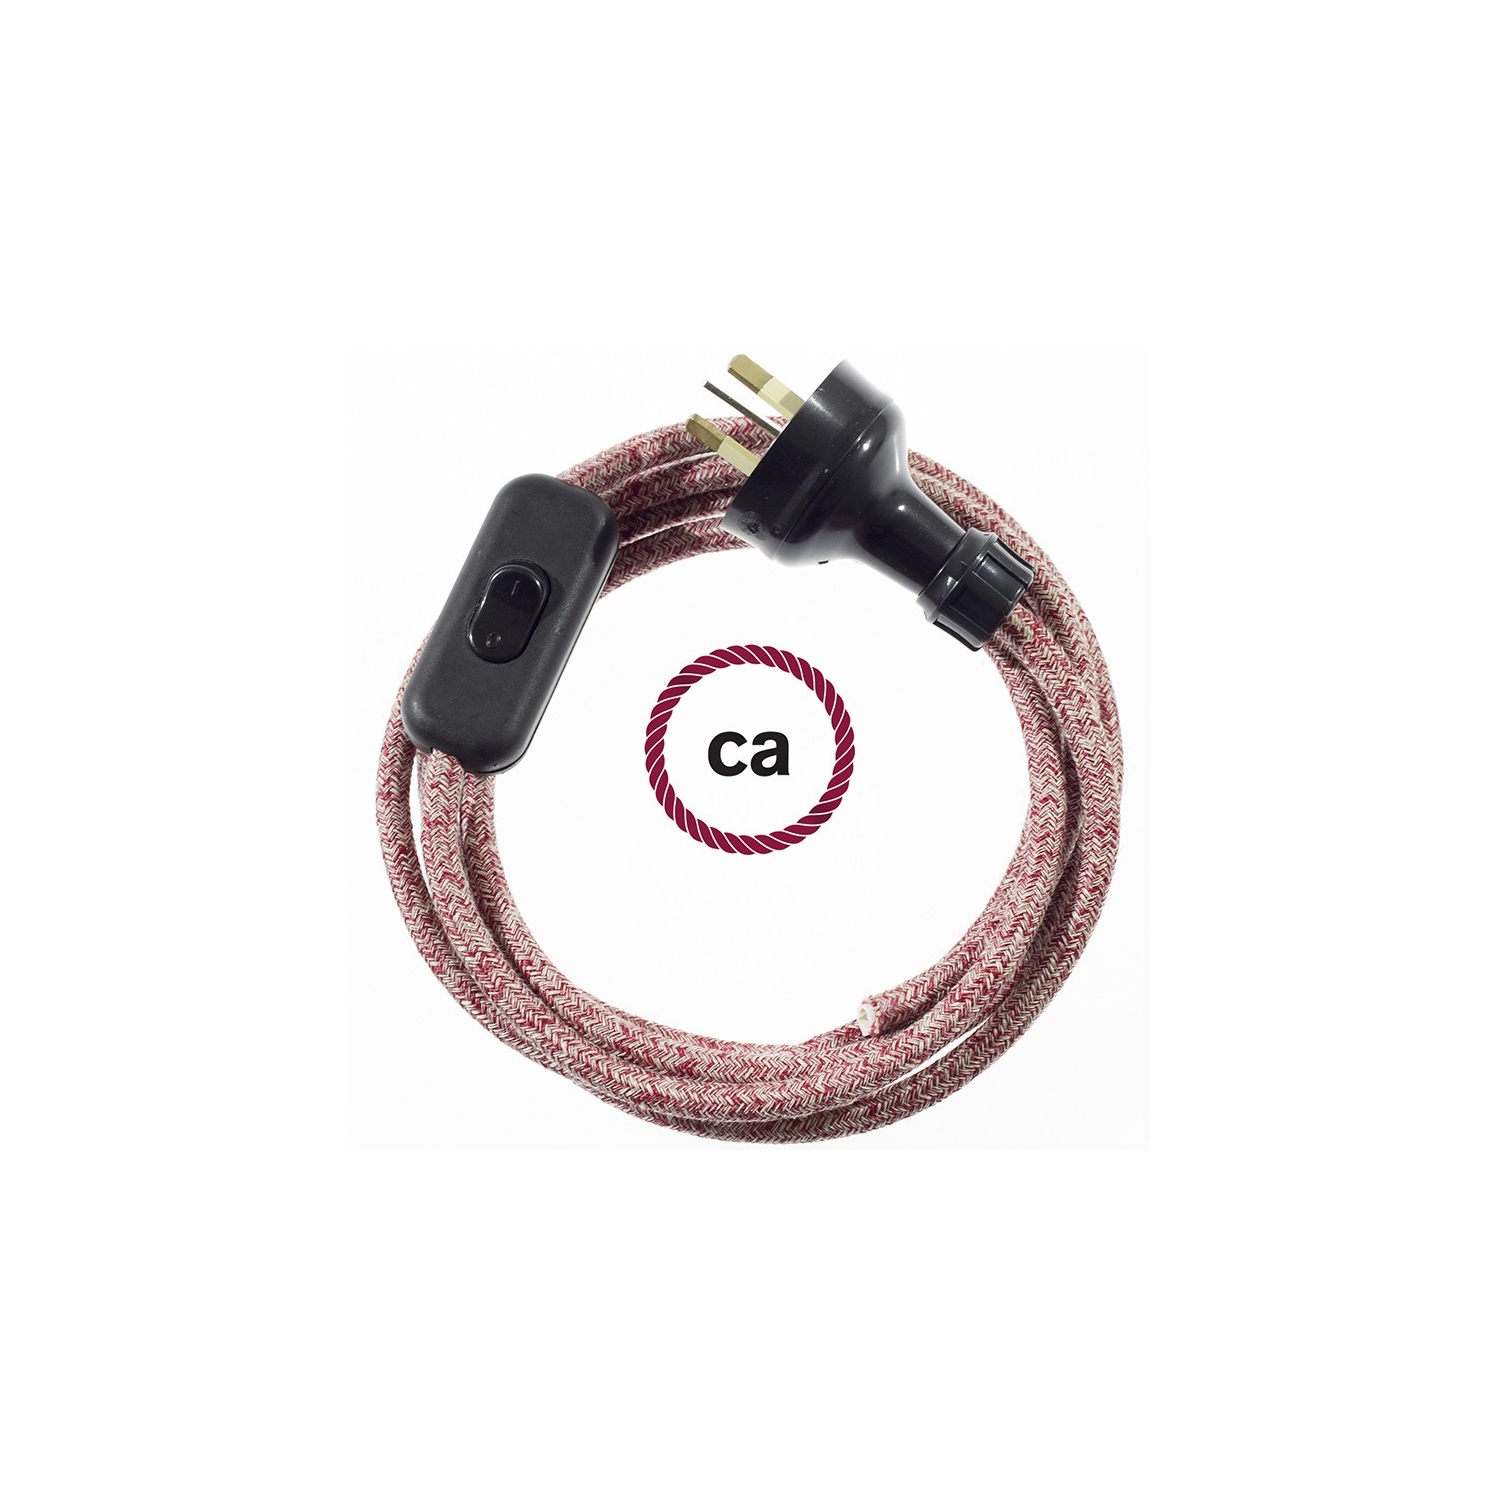 Wiring Red Glittering Natural Linen textile cable RS83 - 1.80 mt